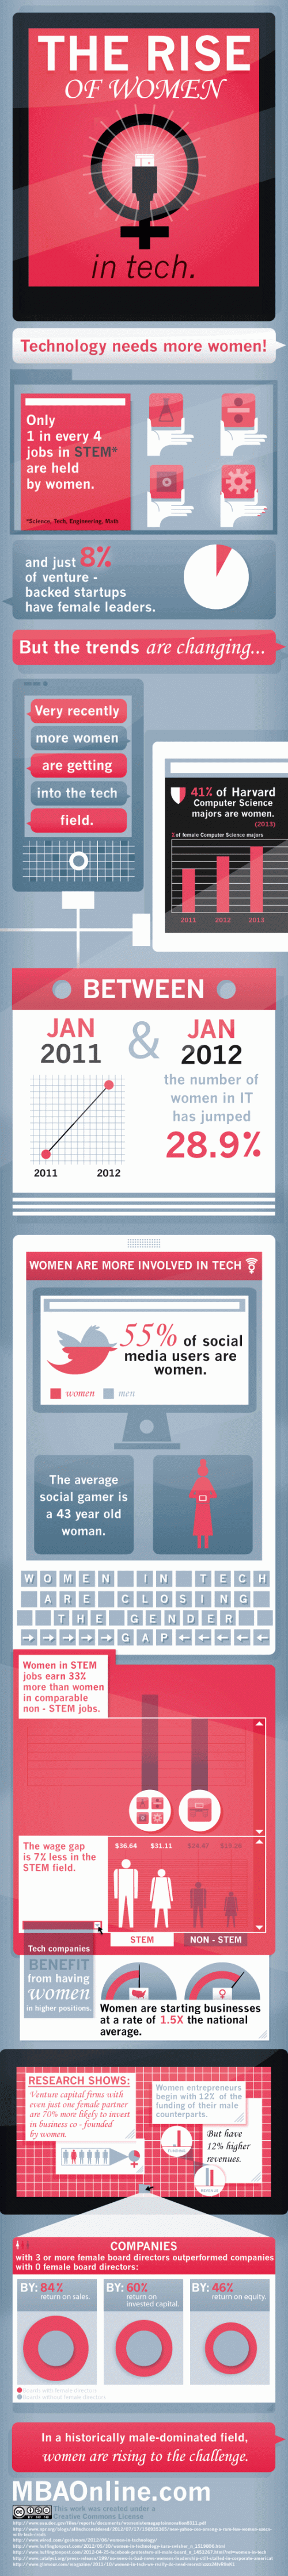 Infographic on the rise of women in tech